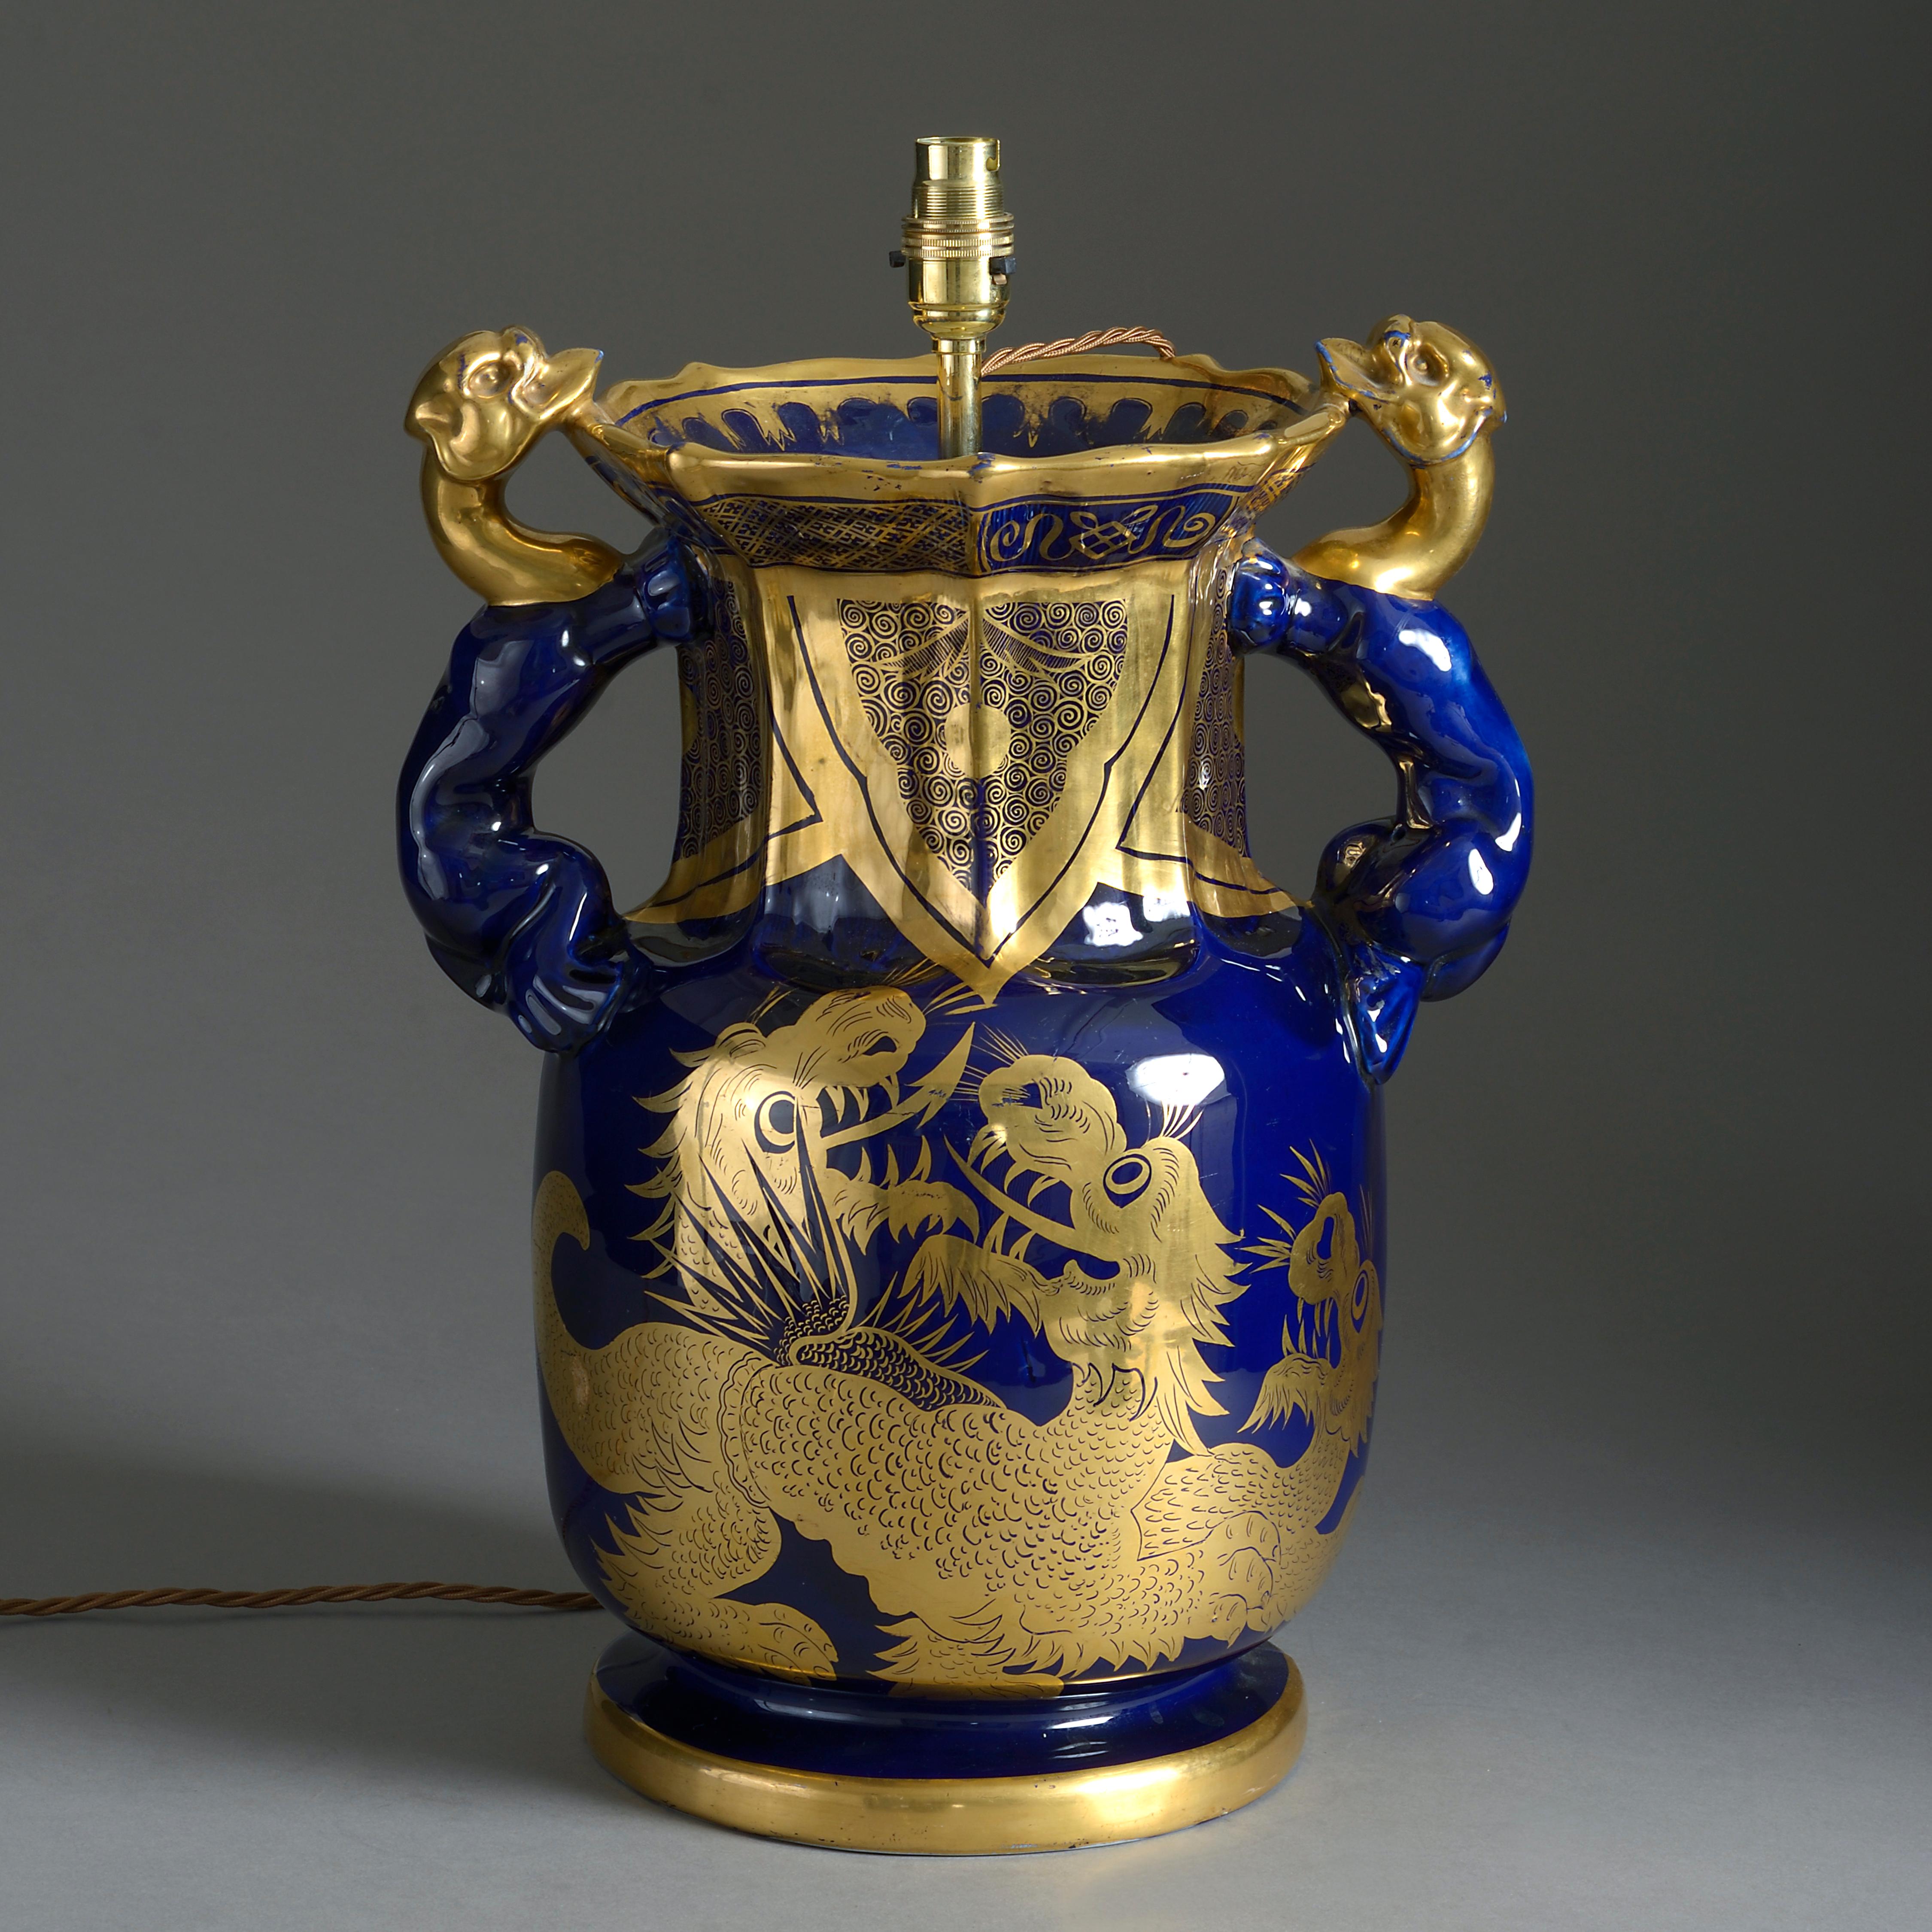 An early 19th century Mason’s Ironstone vase with scrolling handles, decorated with gilded dragons upon a deep blue gound. Now mounted as a table lamp.

Height dimension refers to antique parts only (excluding electrical components).

All lamps